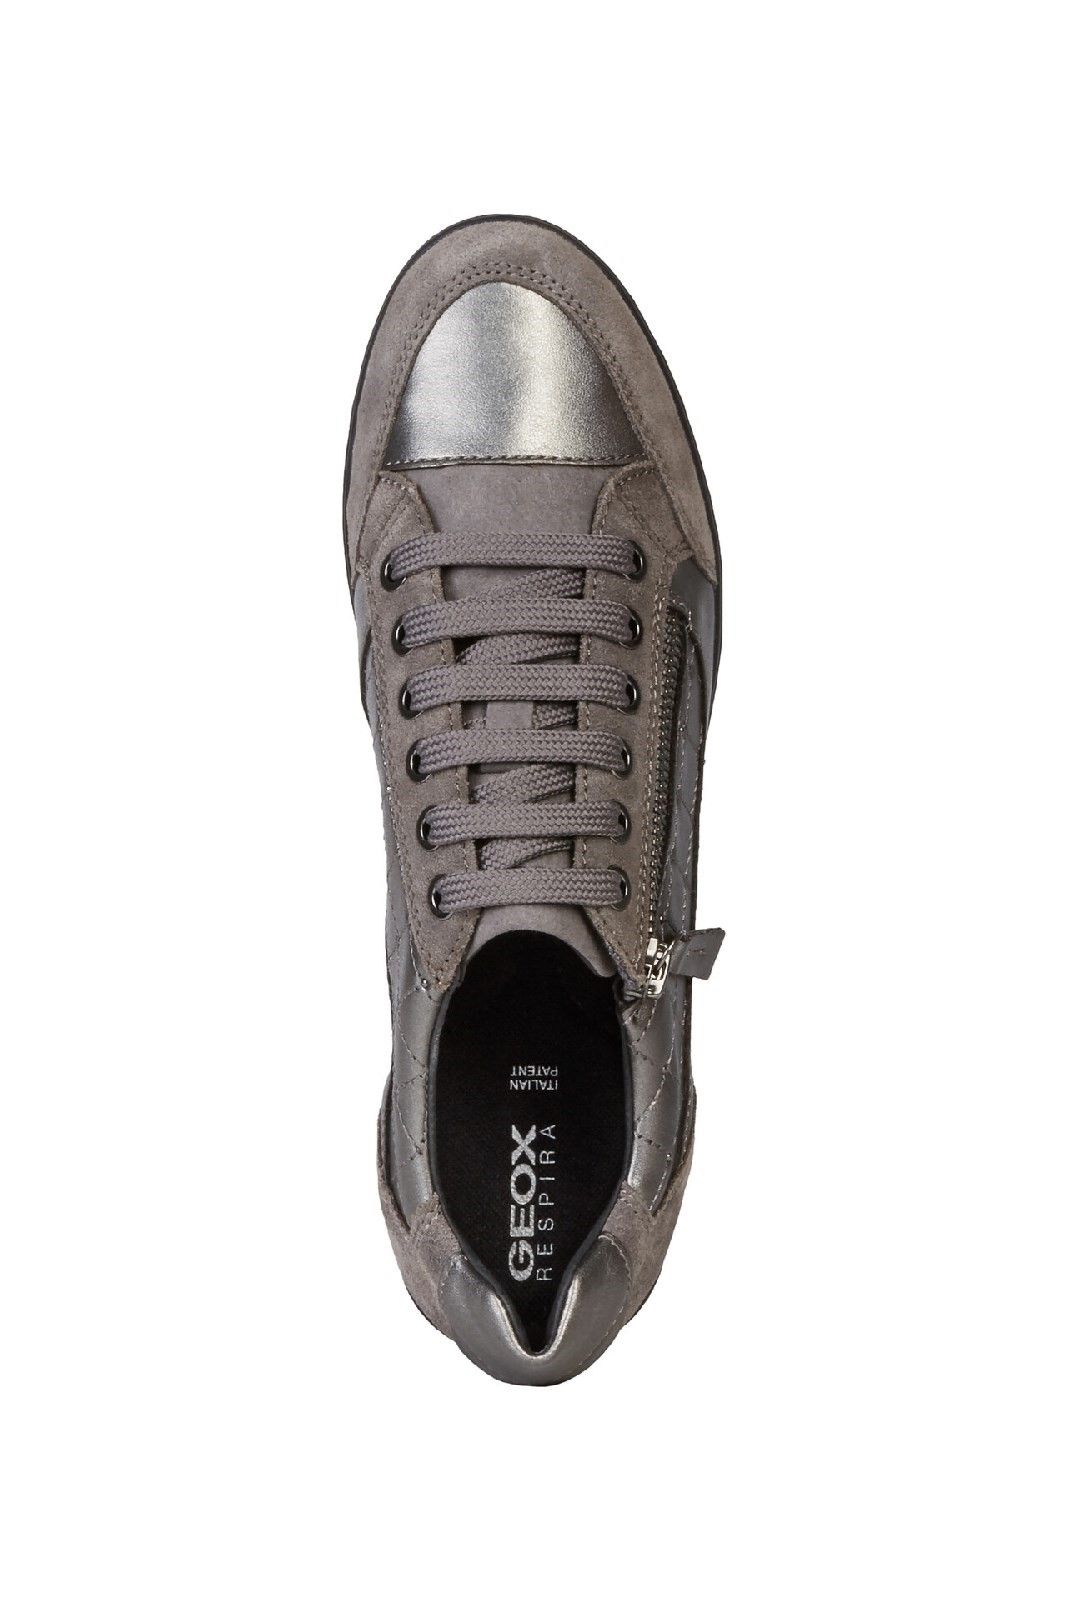 Evergreen Style, Easy-To-Wear Low-Cut Sneakers With Trendy Details For A Contemporary Look. Wellbeing Is Assured Thanks To The Geox Patented Perforated Sole That Provides Maximum Breathability And Comfort.Evergreen. 
Easy To Put On. 
Anti-Slip Outsole.